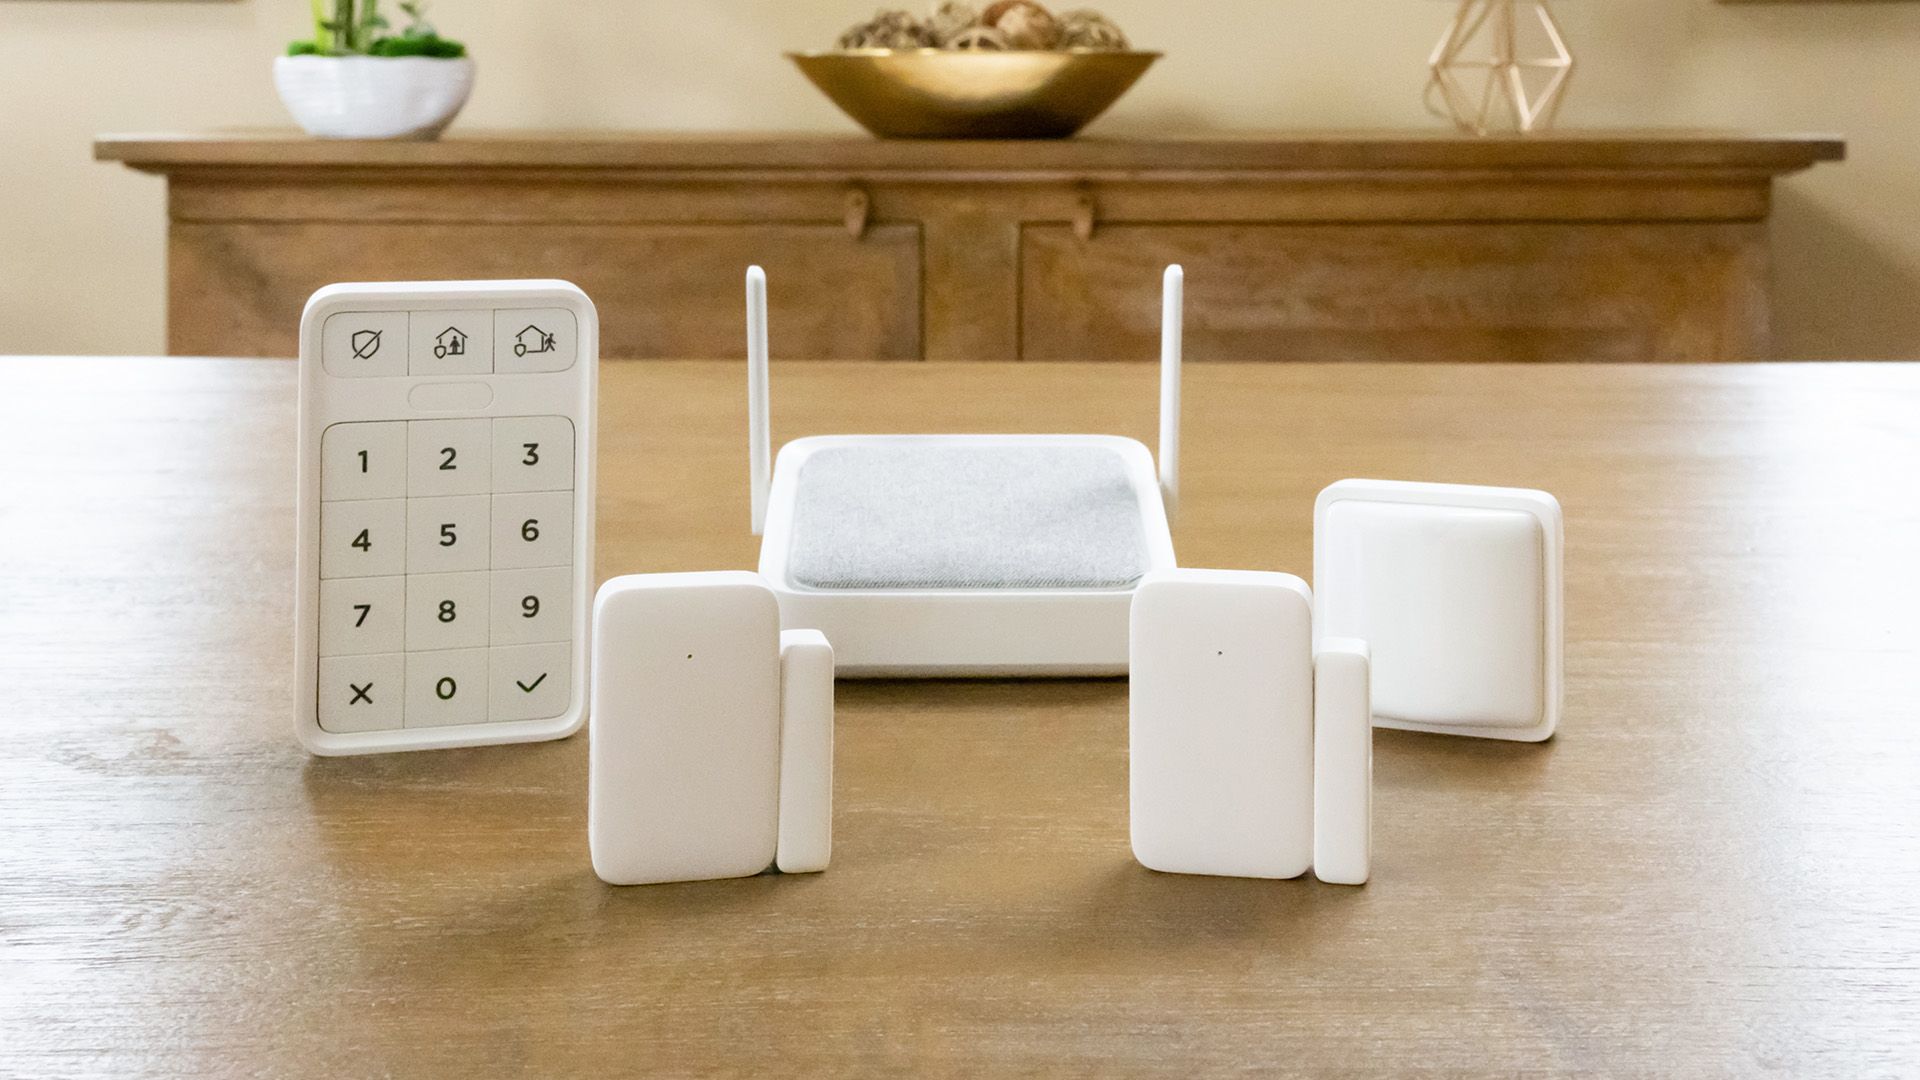 Roku Home Monitoring System SE on a table